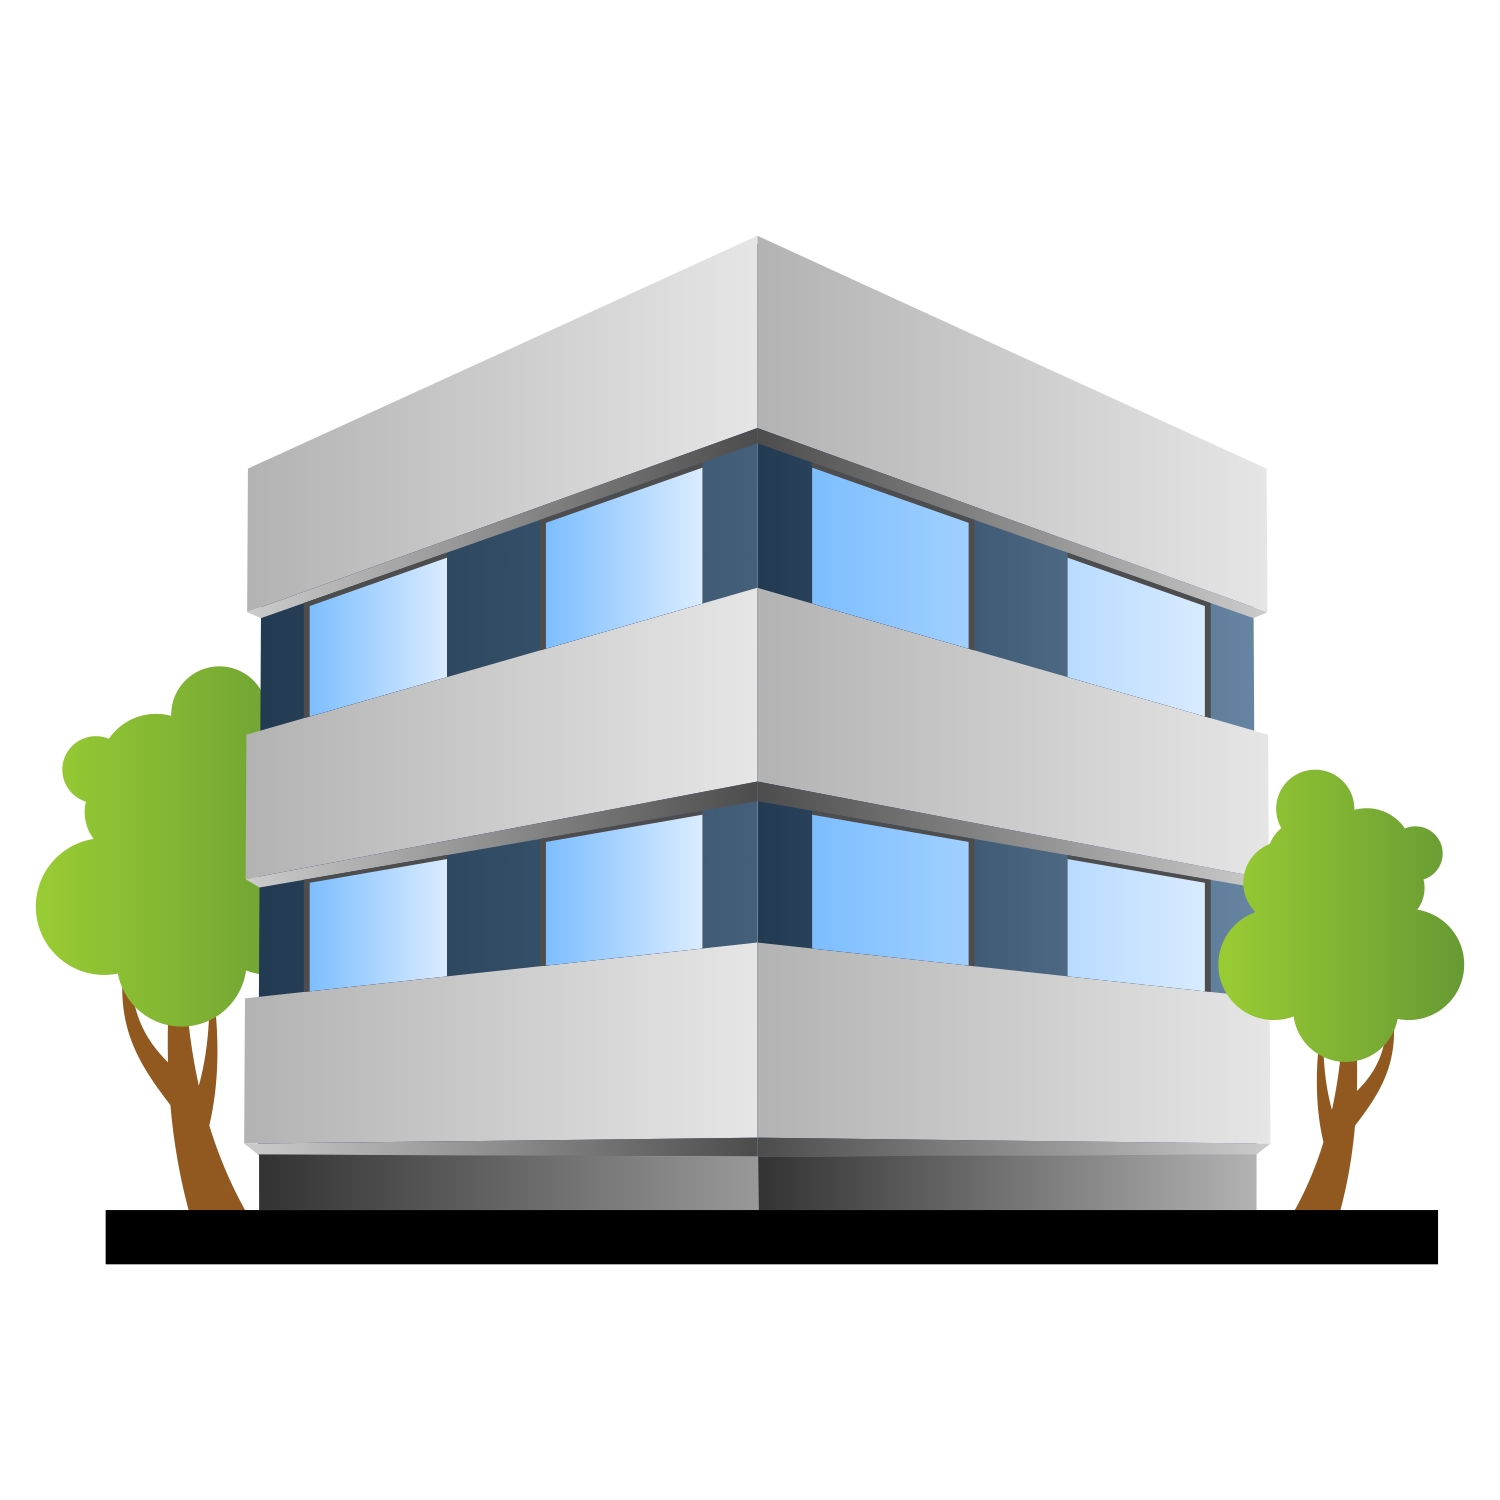 ... Office building isometric